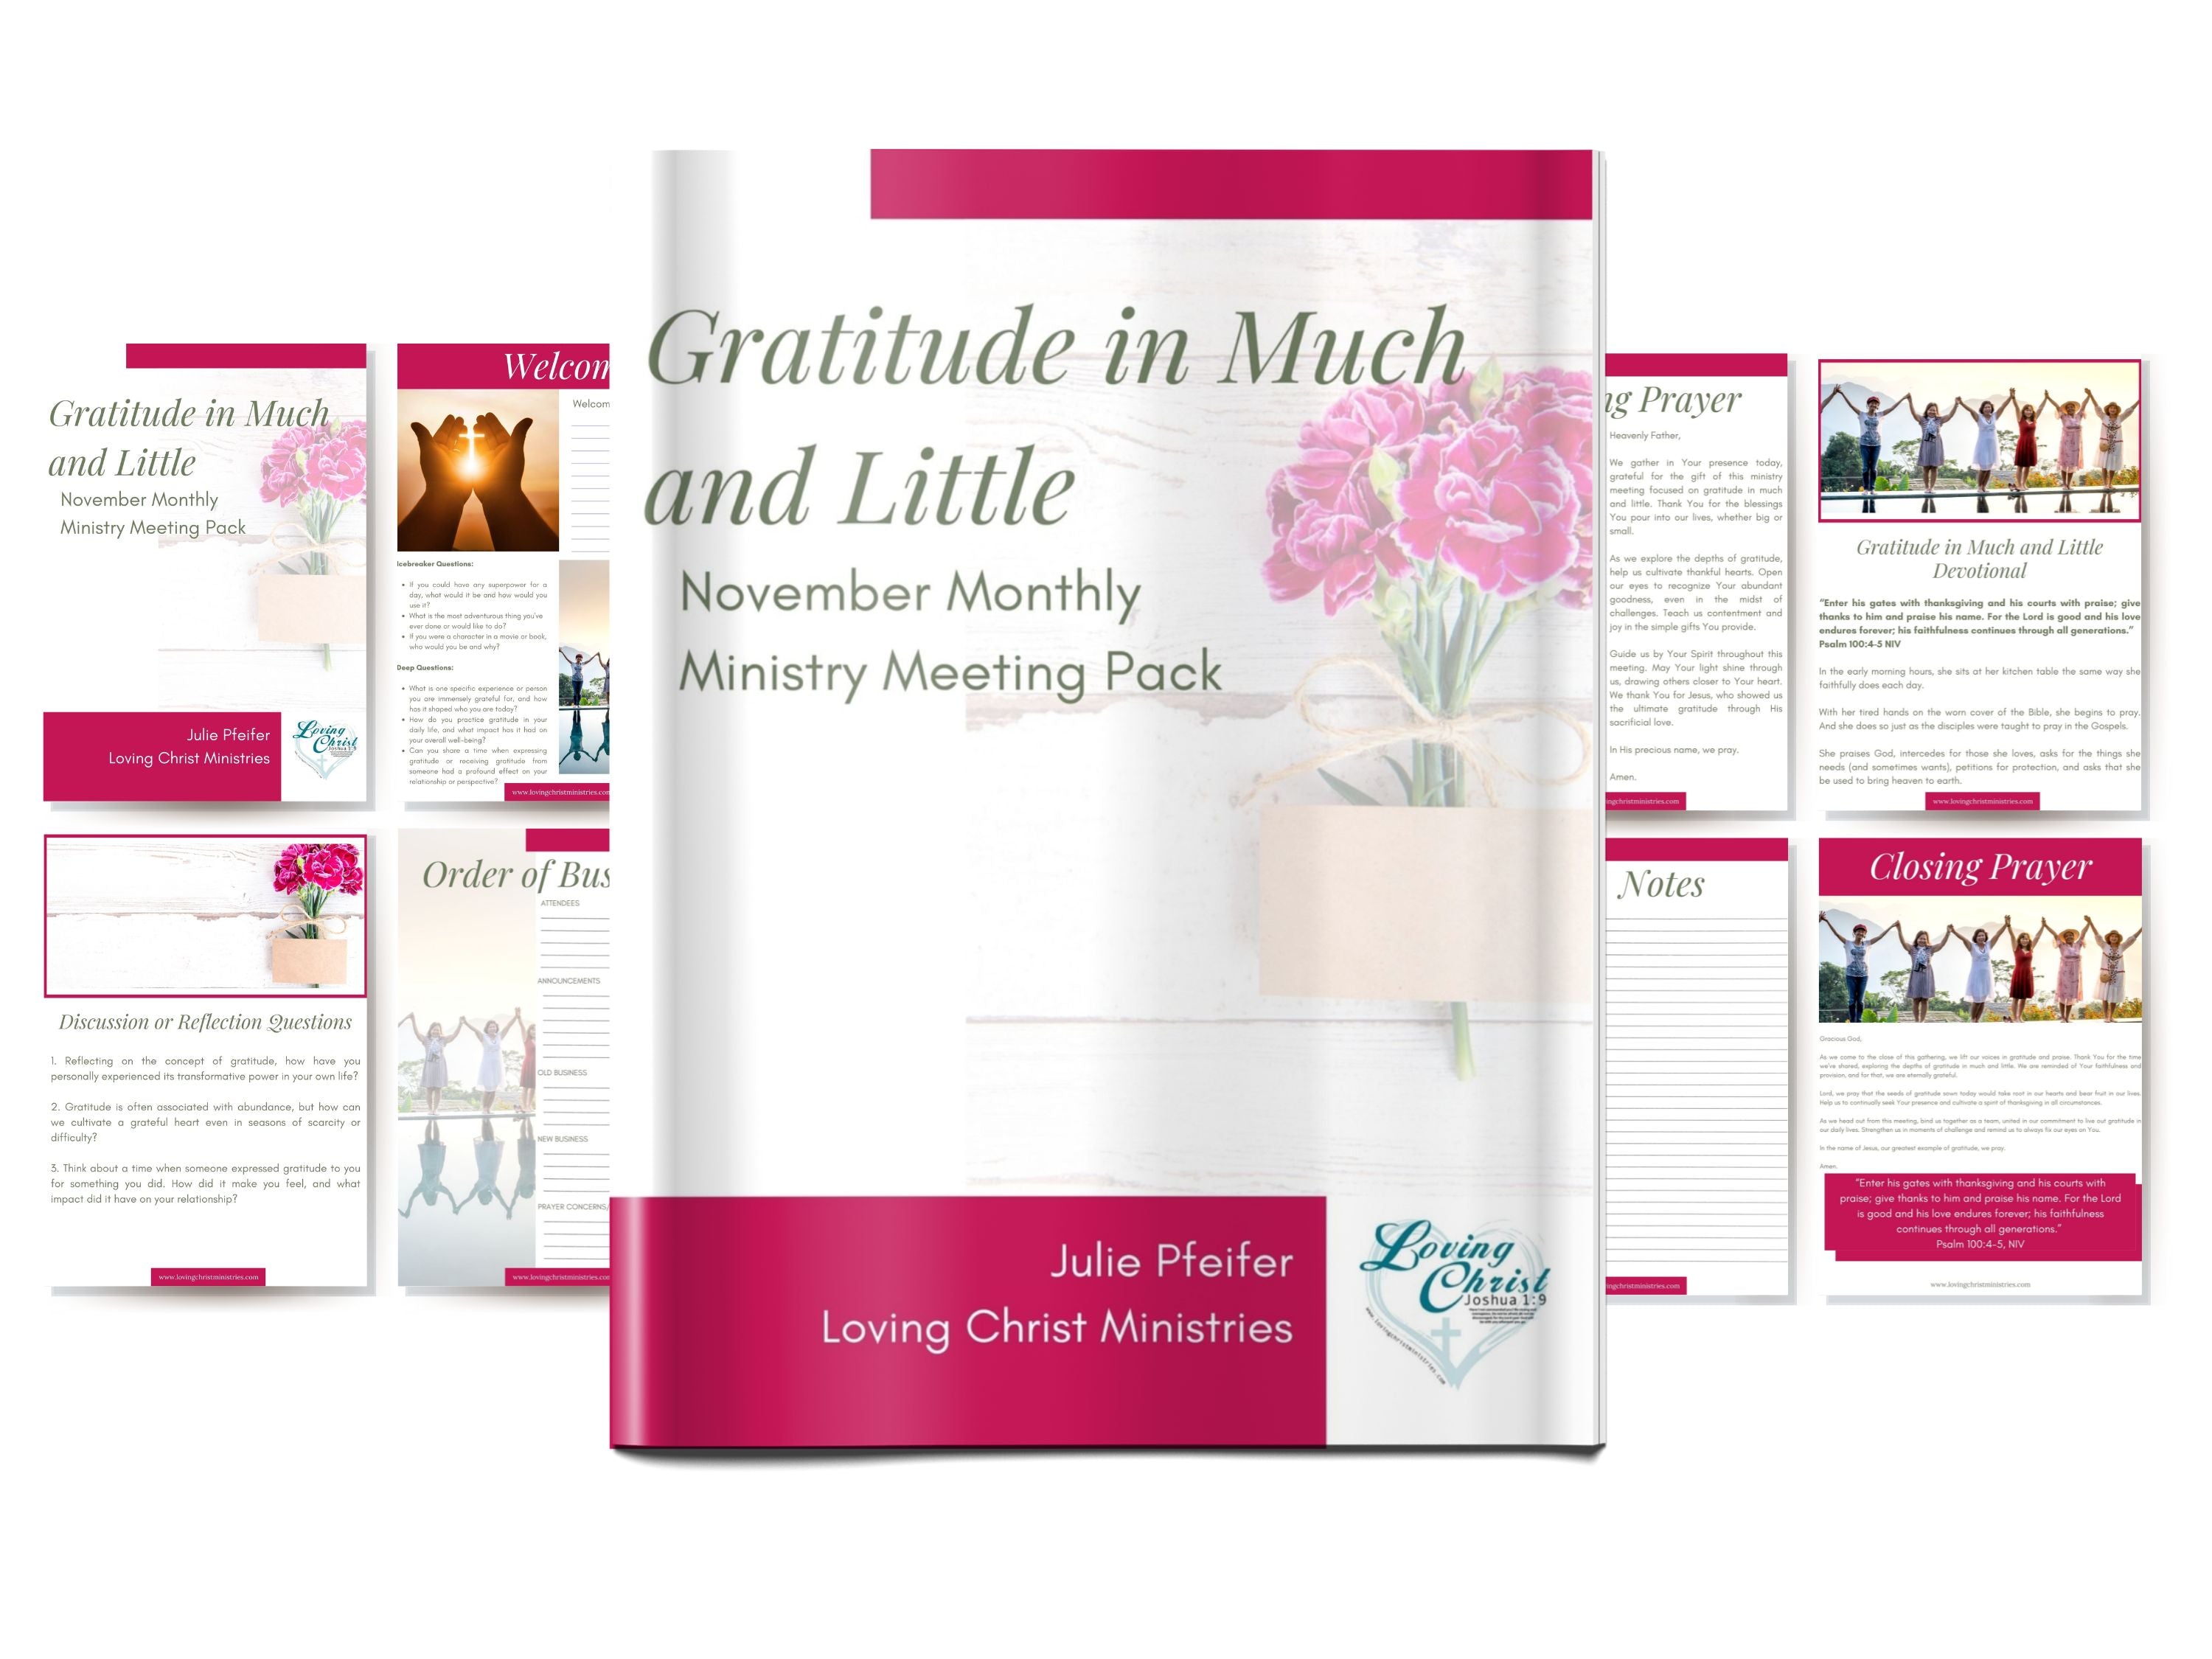 November Monthly Ministry Meeting Pack - Gratitude in Much and Little